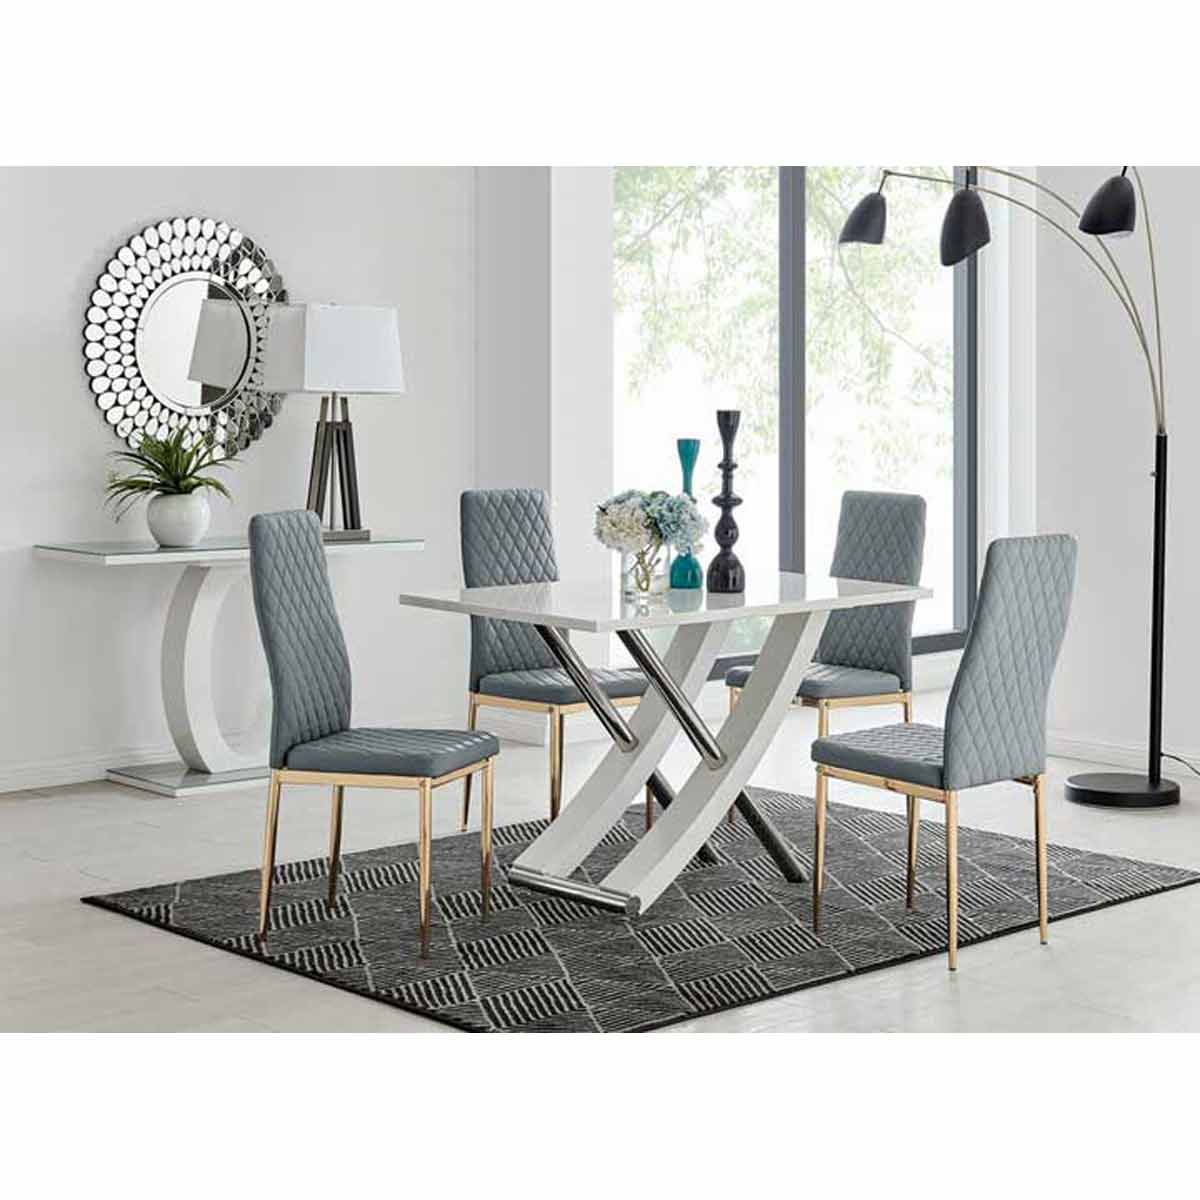 Furniture Box Mayfair 4 Seater Dining Table and 4 x Grey Gold Leg Milan Chairs